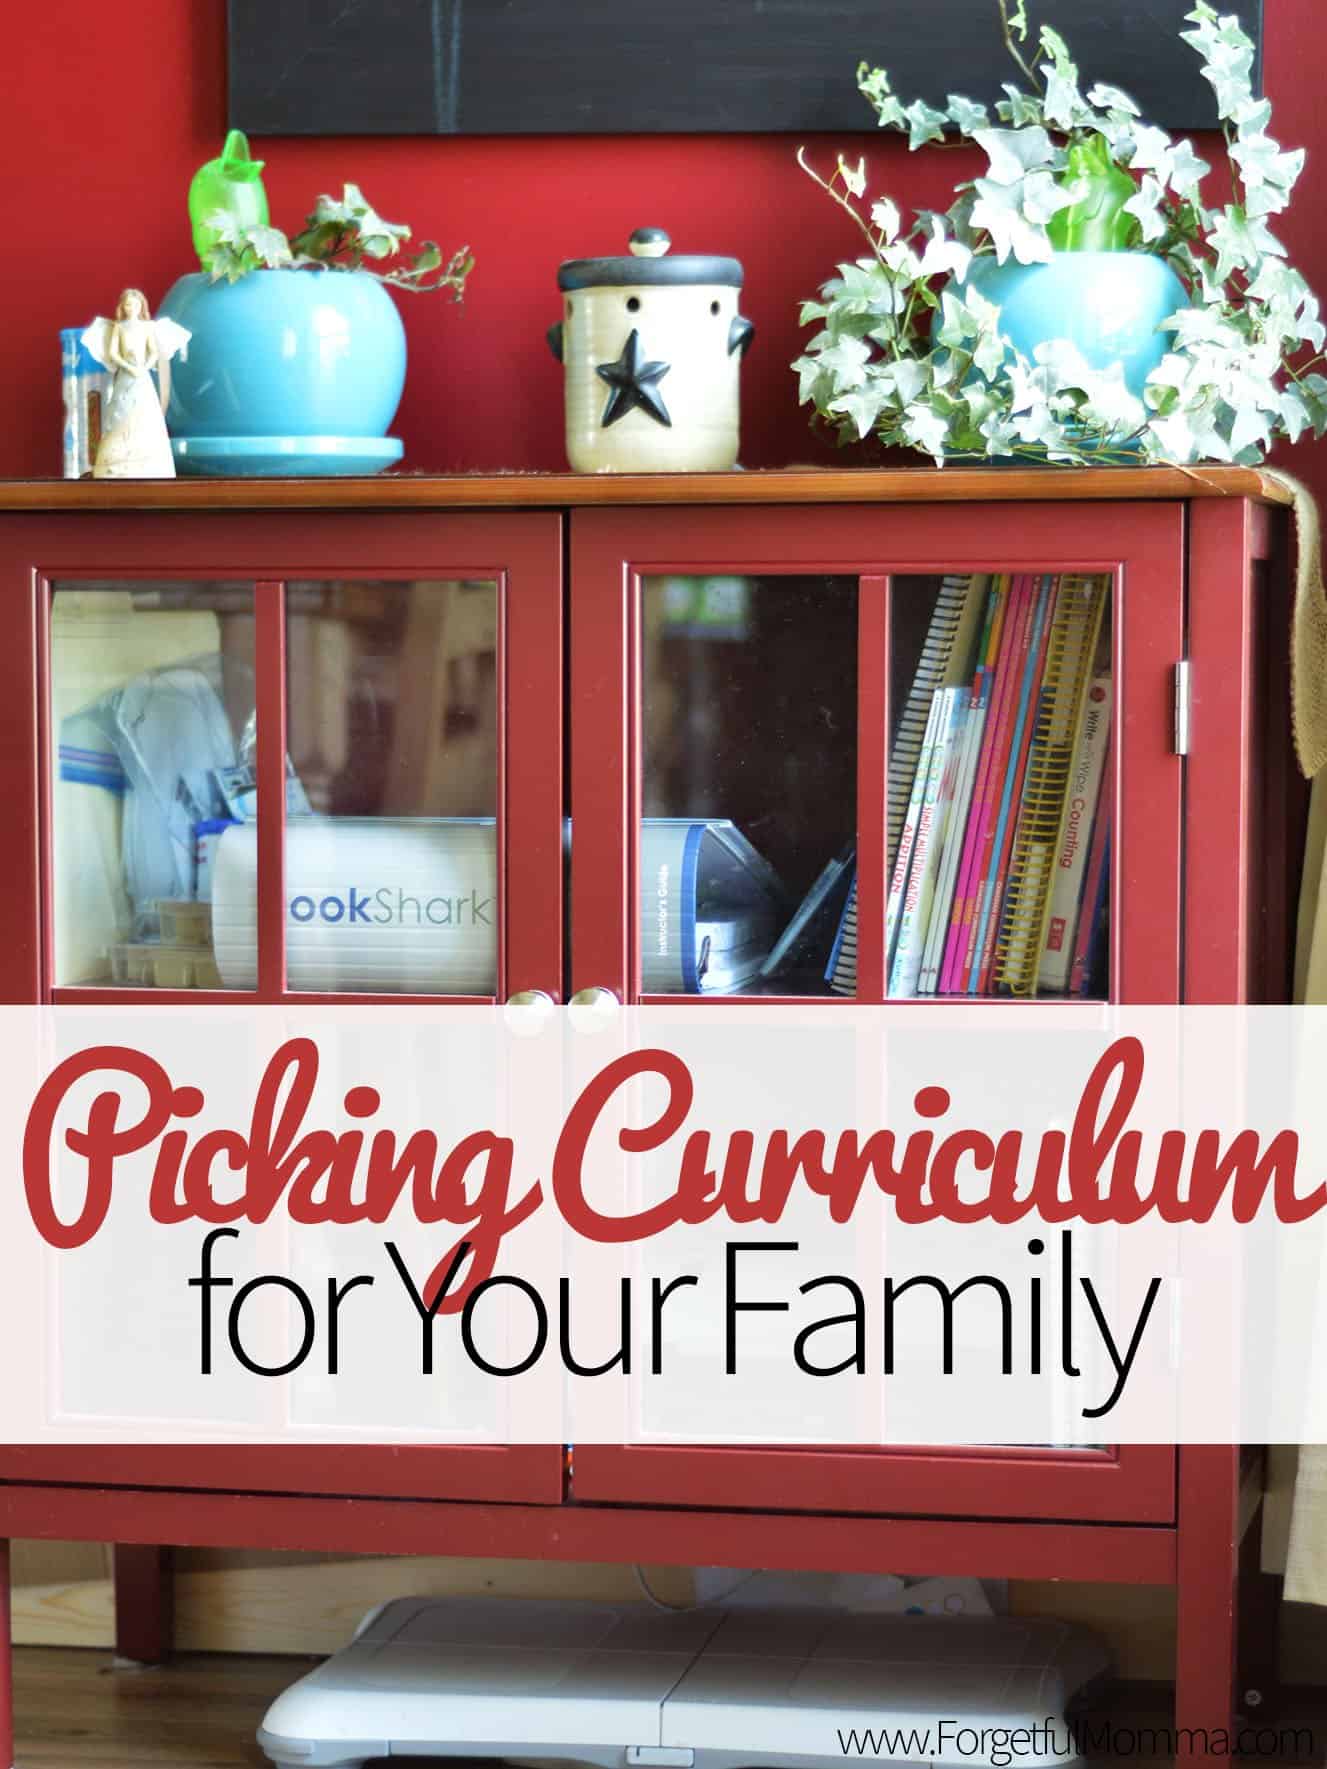 Picking Curriculum for Your Family